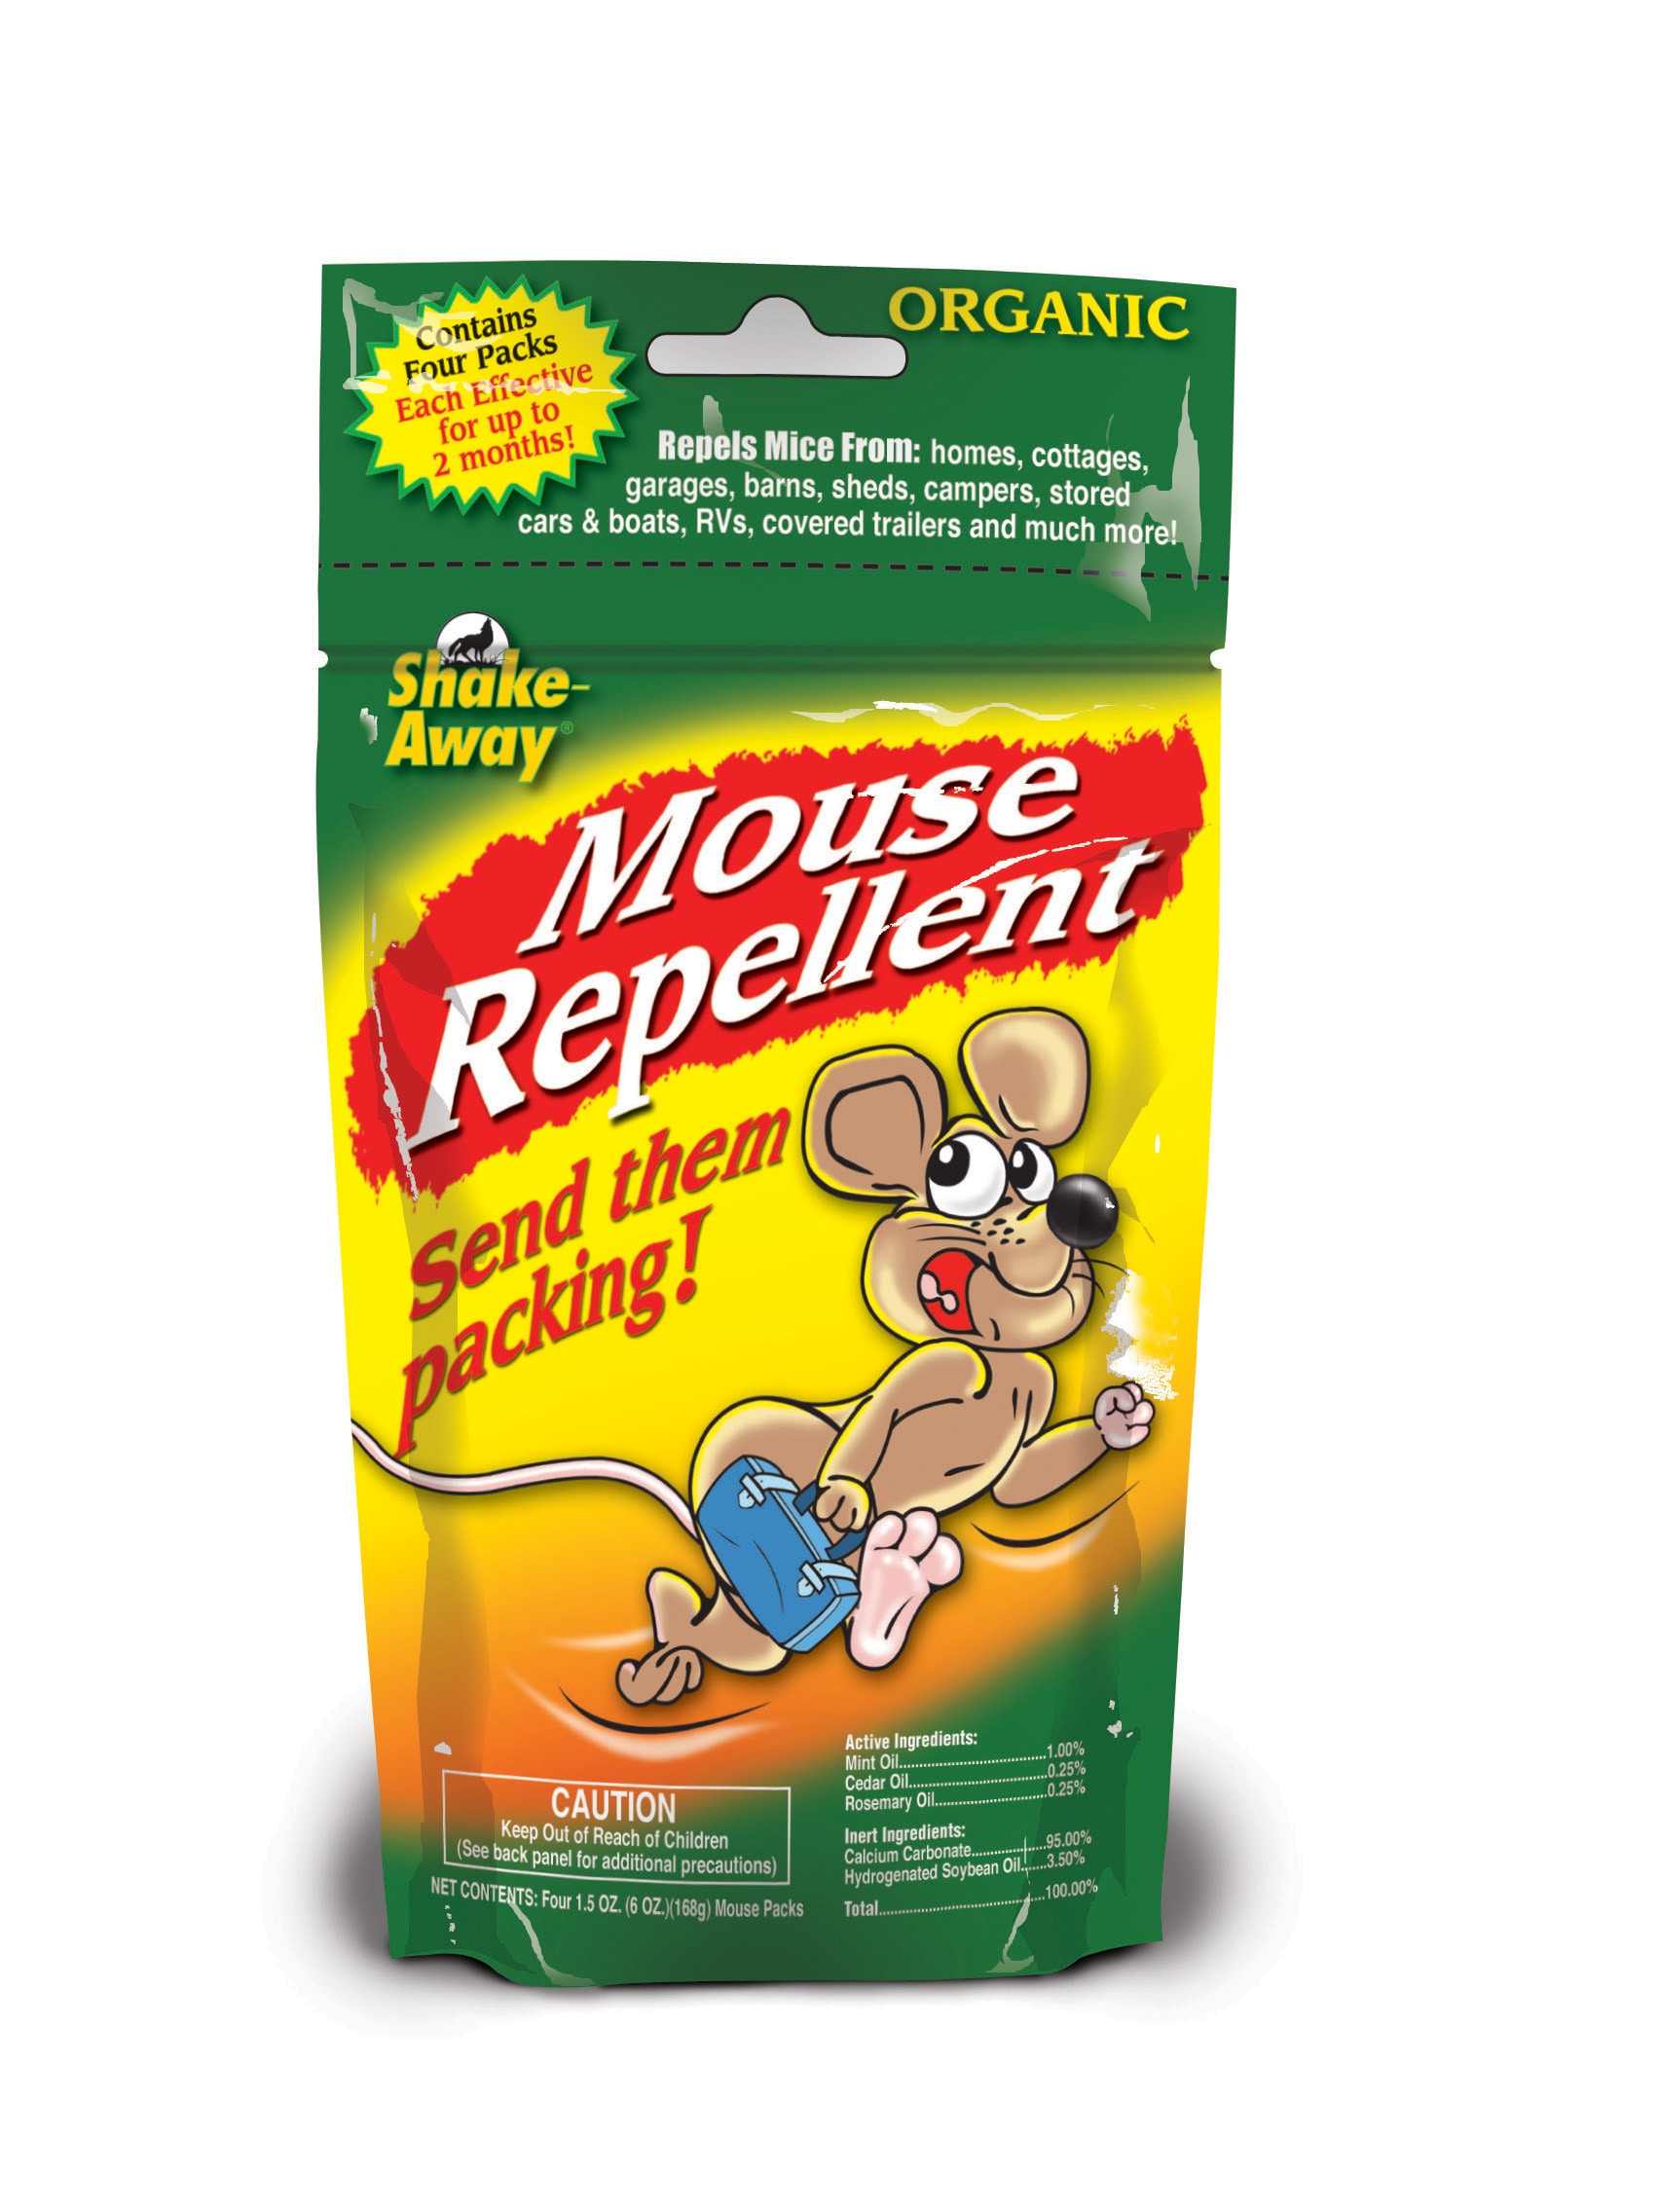 Here's the DIY Recipe For Non-Toxic 'No Mouse In My House' Pest